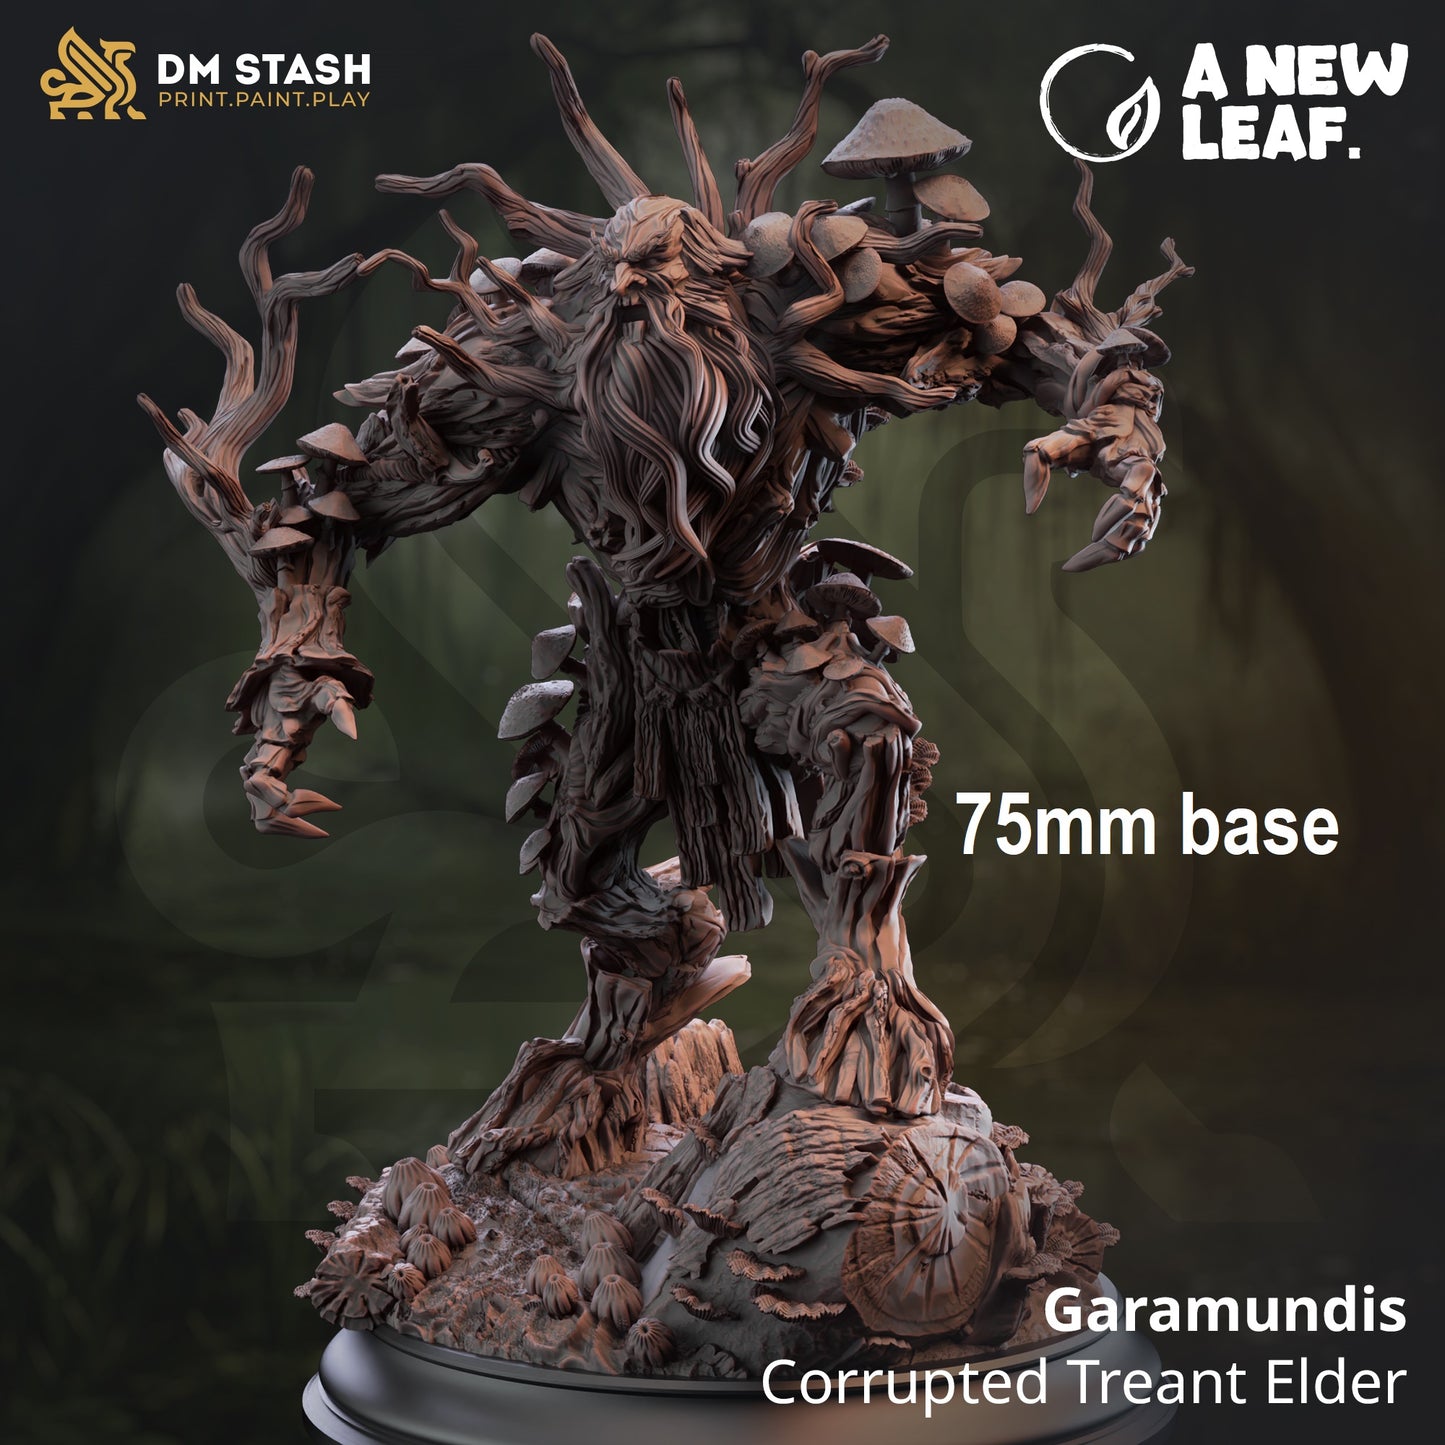 Image shows an 3D render of a bearded treant gaming miniature with mushrooms growing out if it